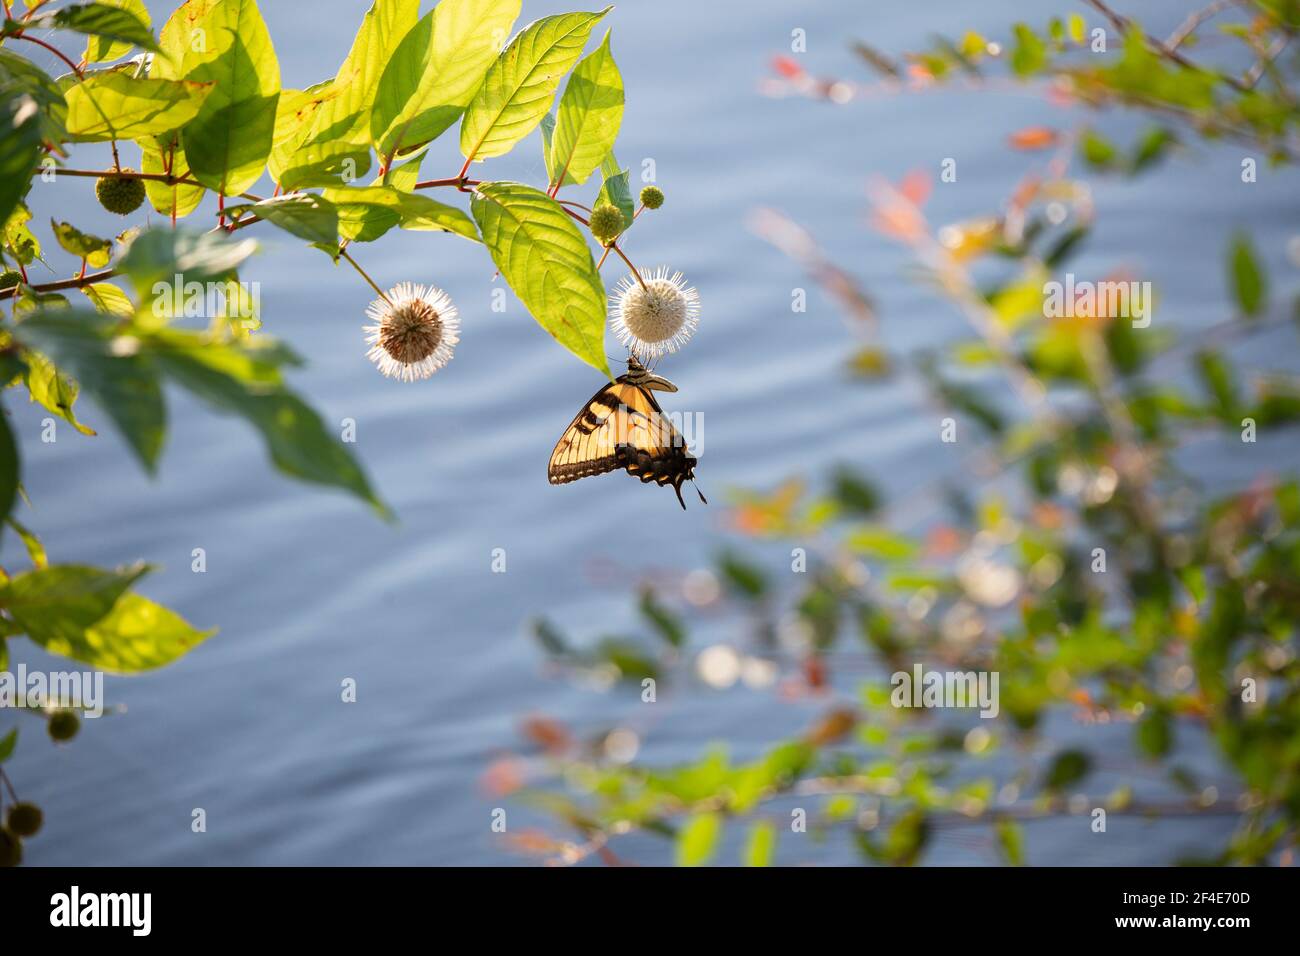 Tiger swallowtail butterfly (Papilio glaucus) on a buttonbush (Cephalanthus occidentalis) flower Stock Photo